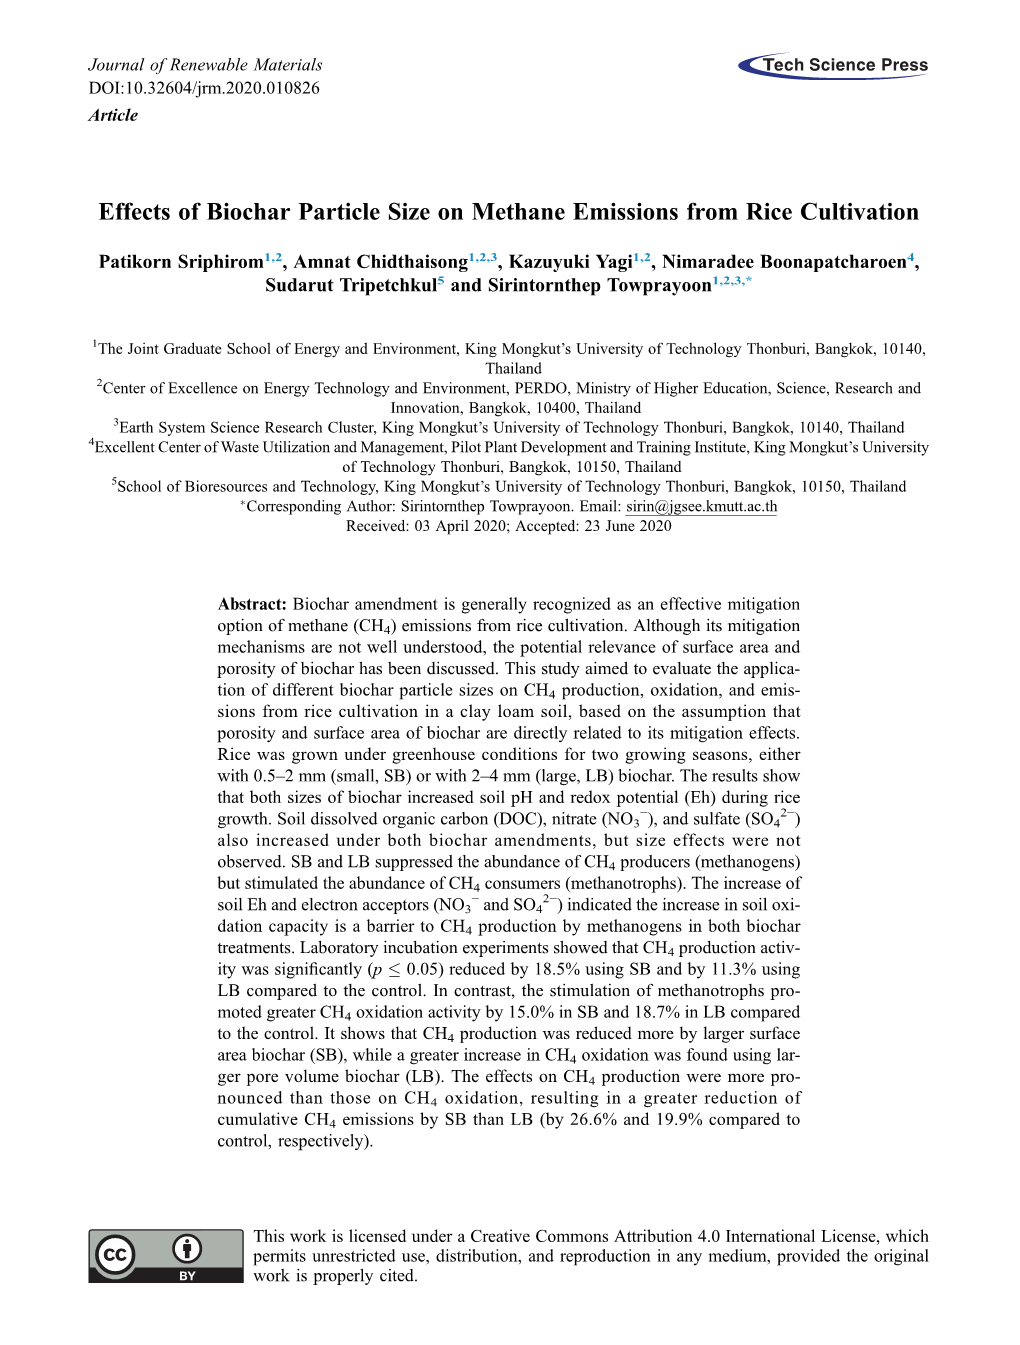 Effects of Biochar Particle Size on Methane Emissions from Rice Cultivation